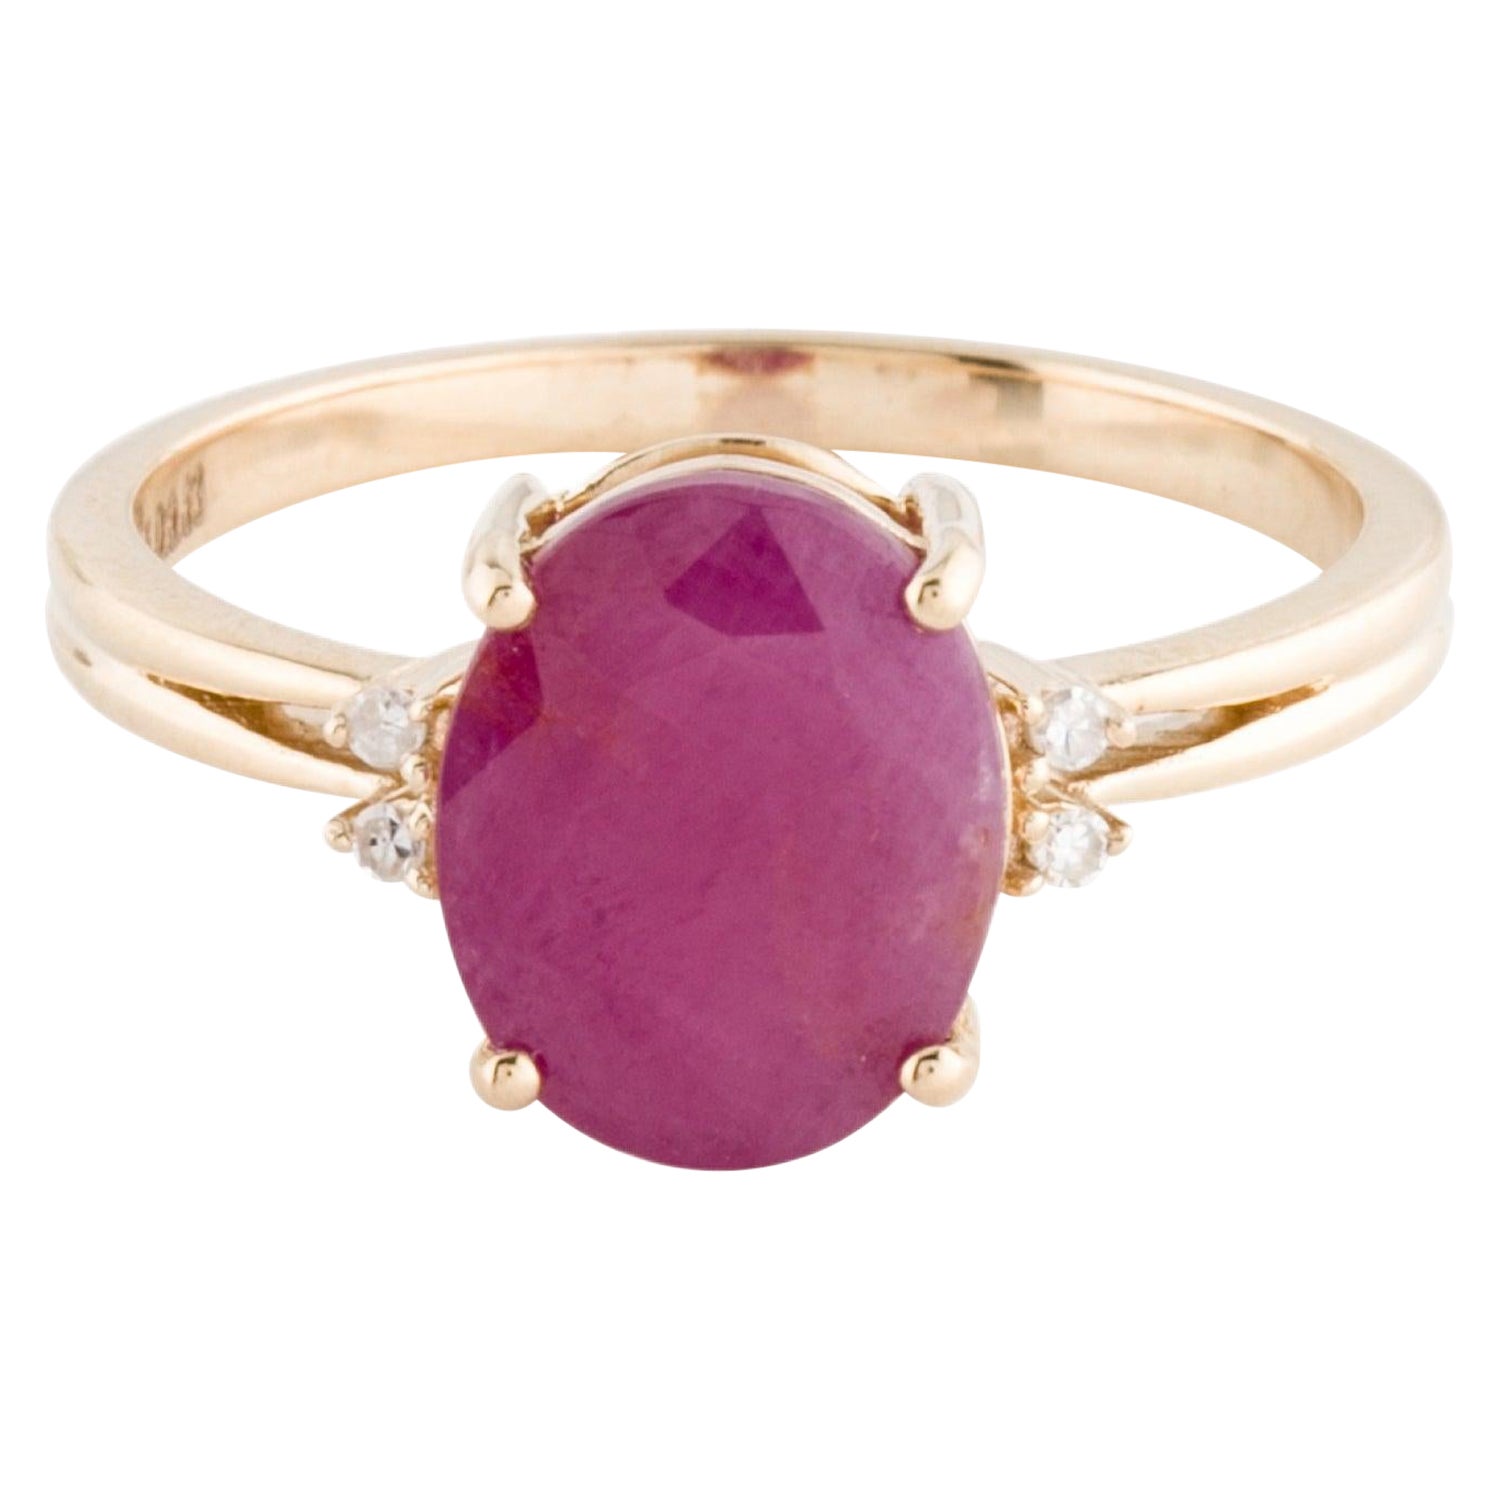 Luxurious 14K Gold 2.25ct Ruby & Diamond Cocktail Ring - Size 6.75 - Exquisite For Sale